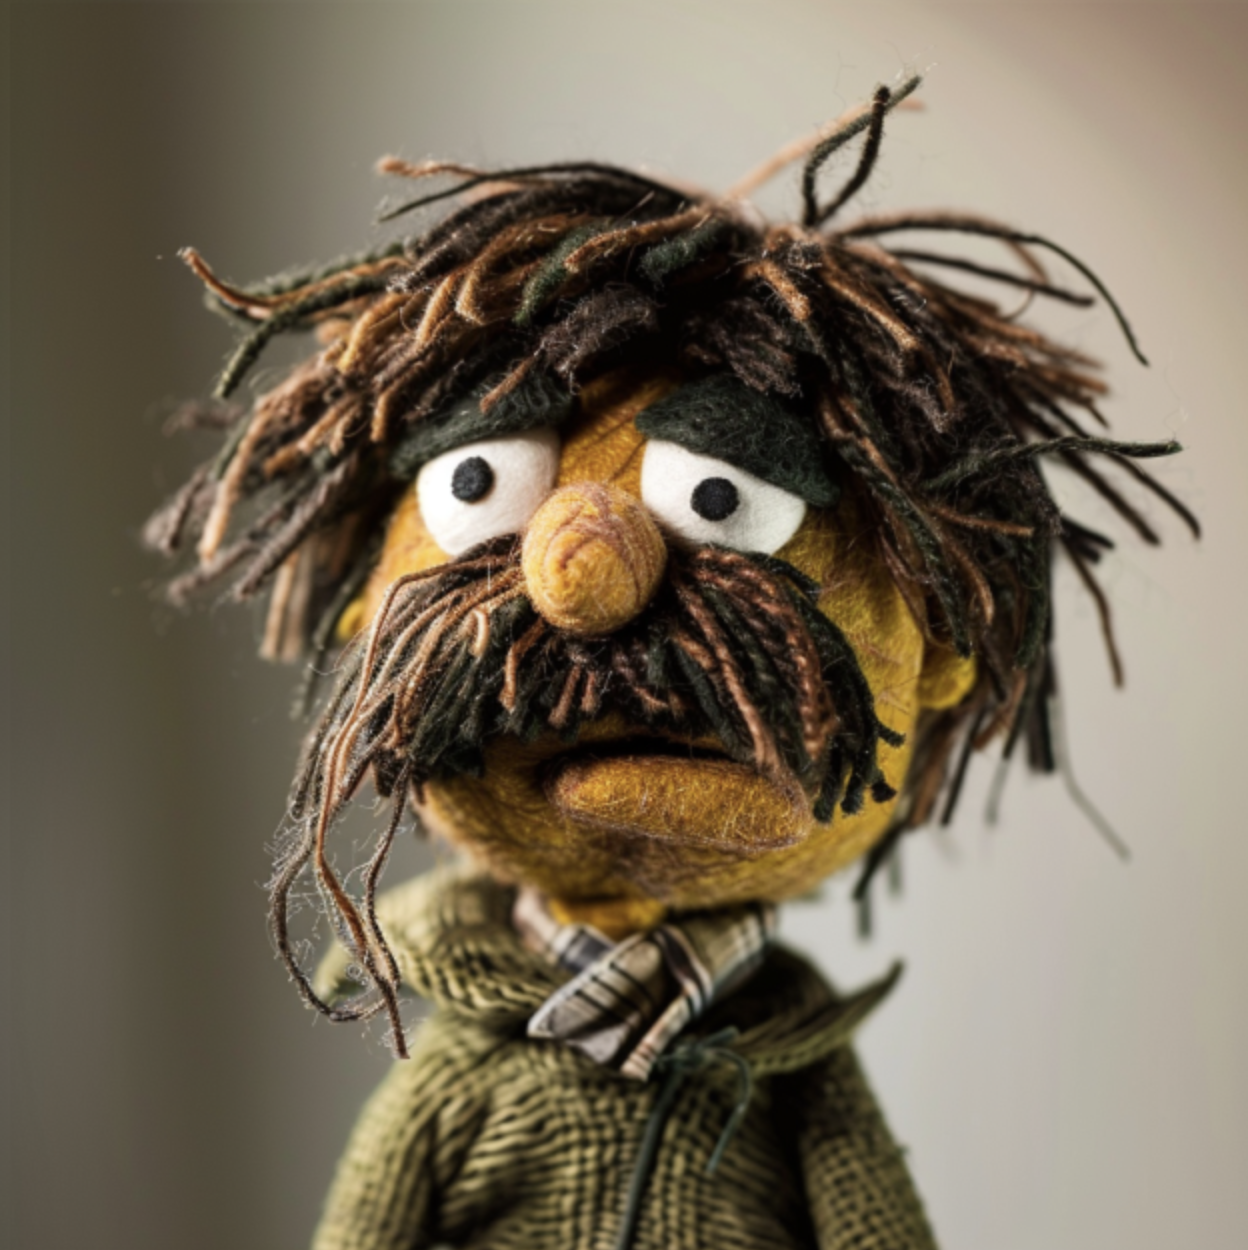 Muppet with shaggy hair, mustache, striped tie, and green sweater